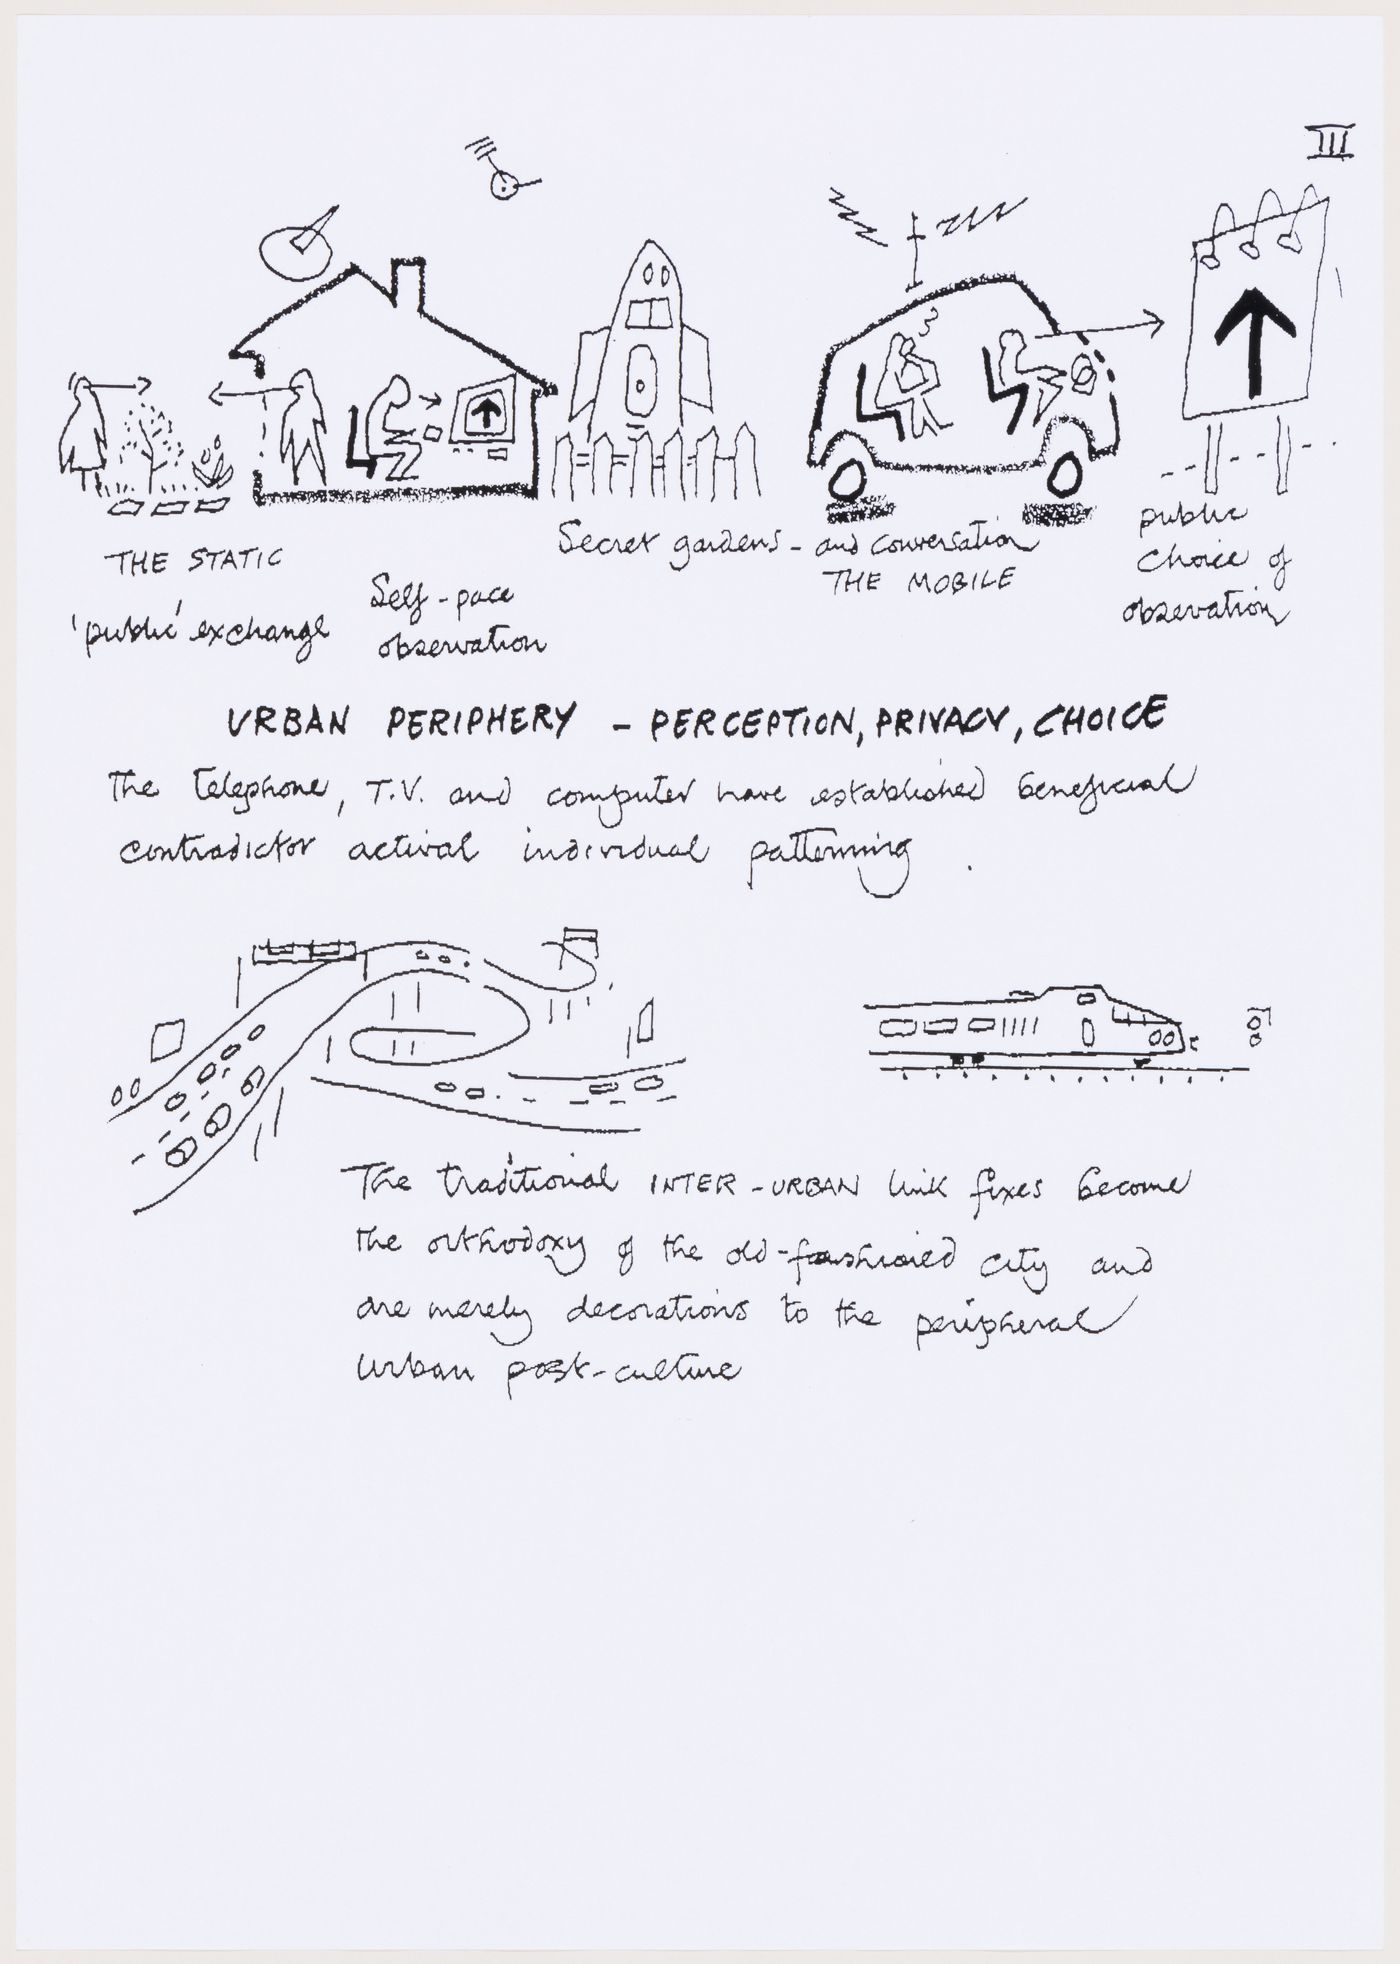 Sketches and notes about the "urban periphery" from the project file "Venic"